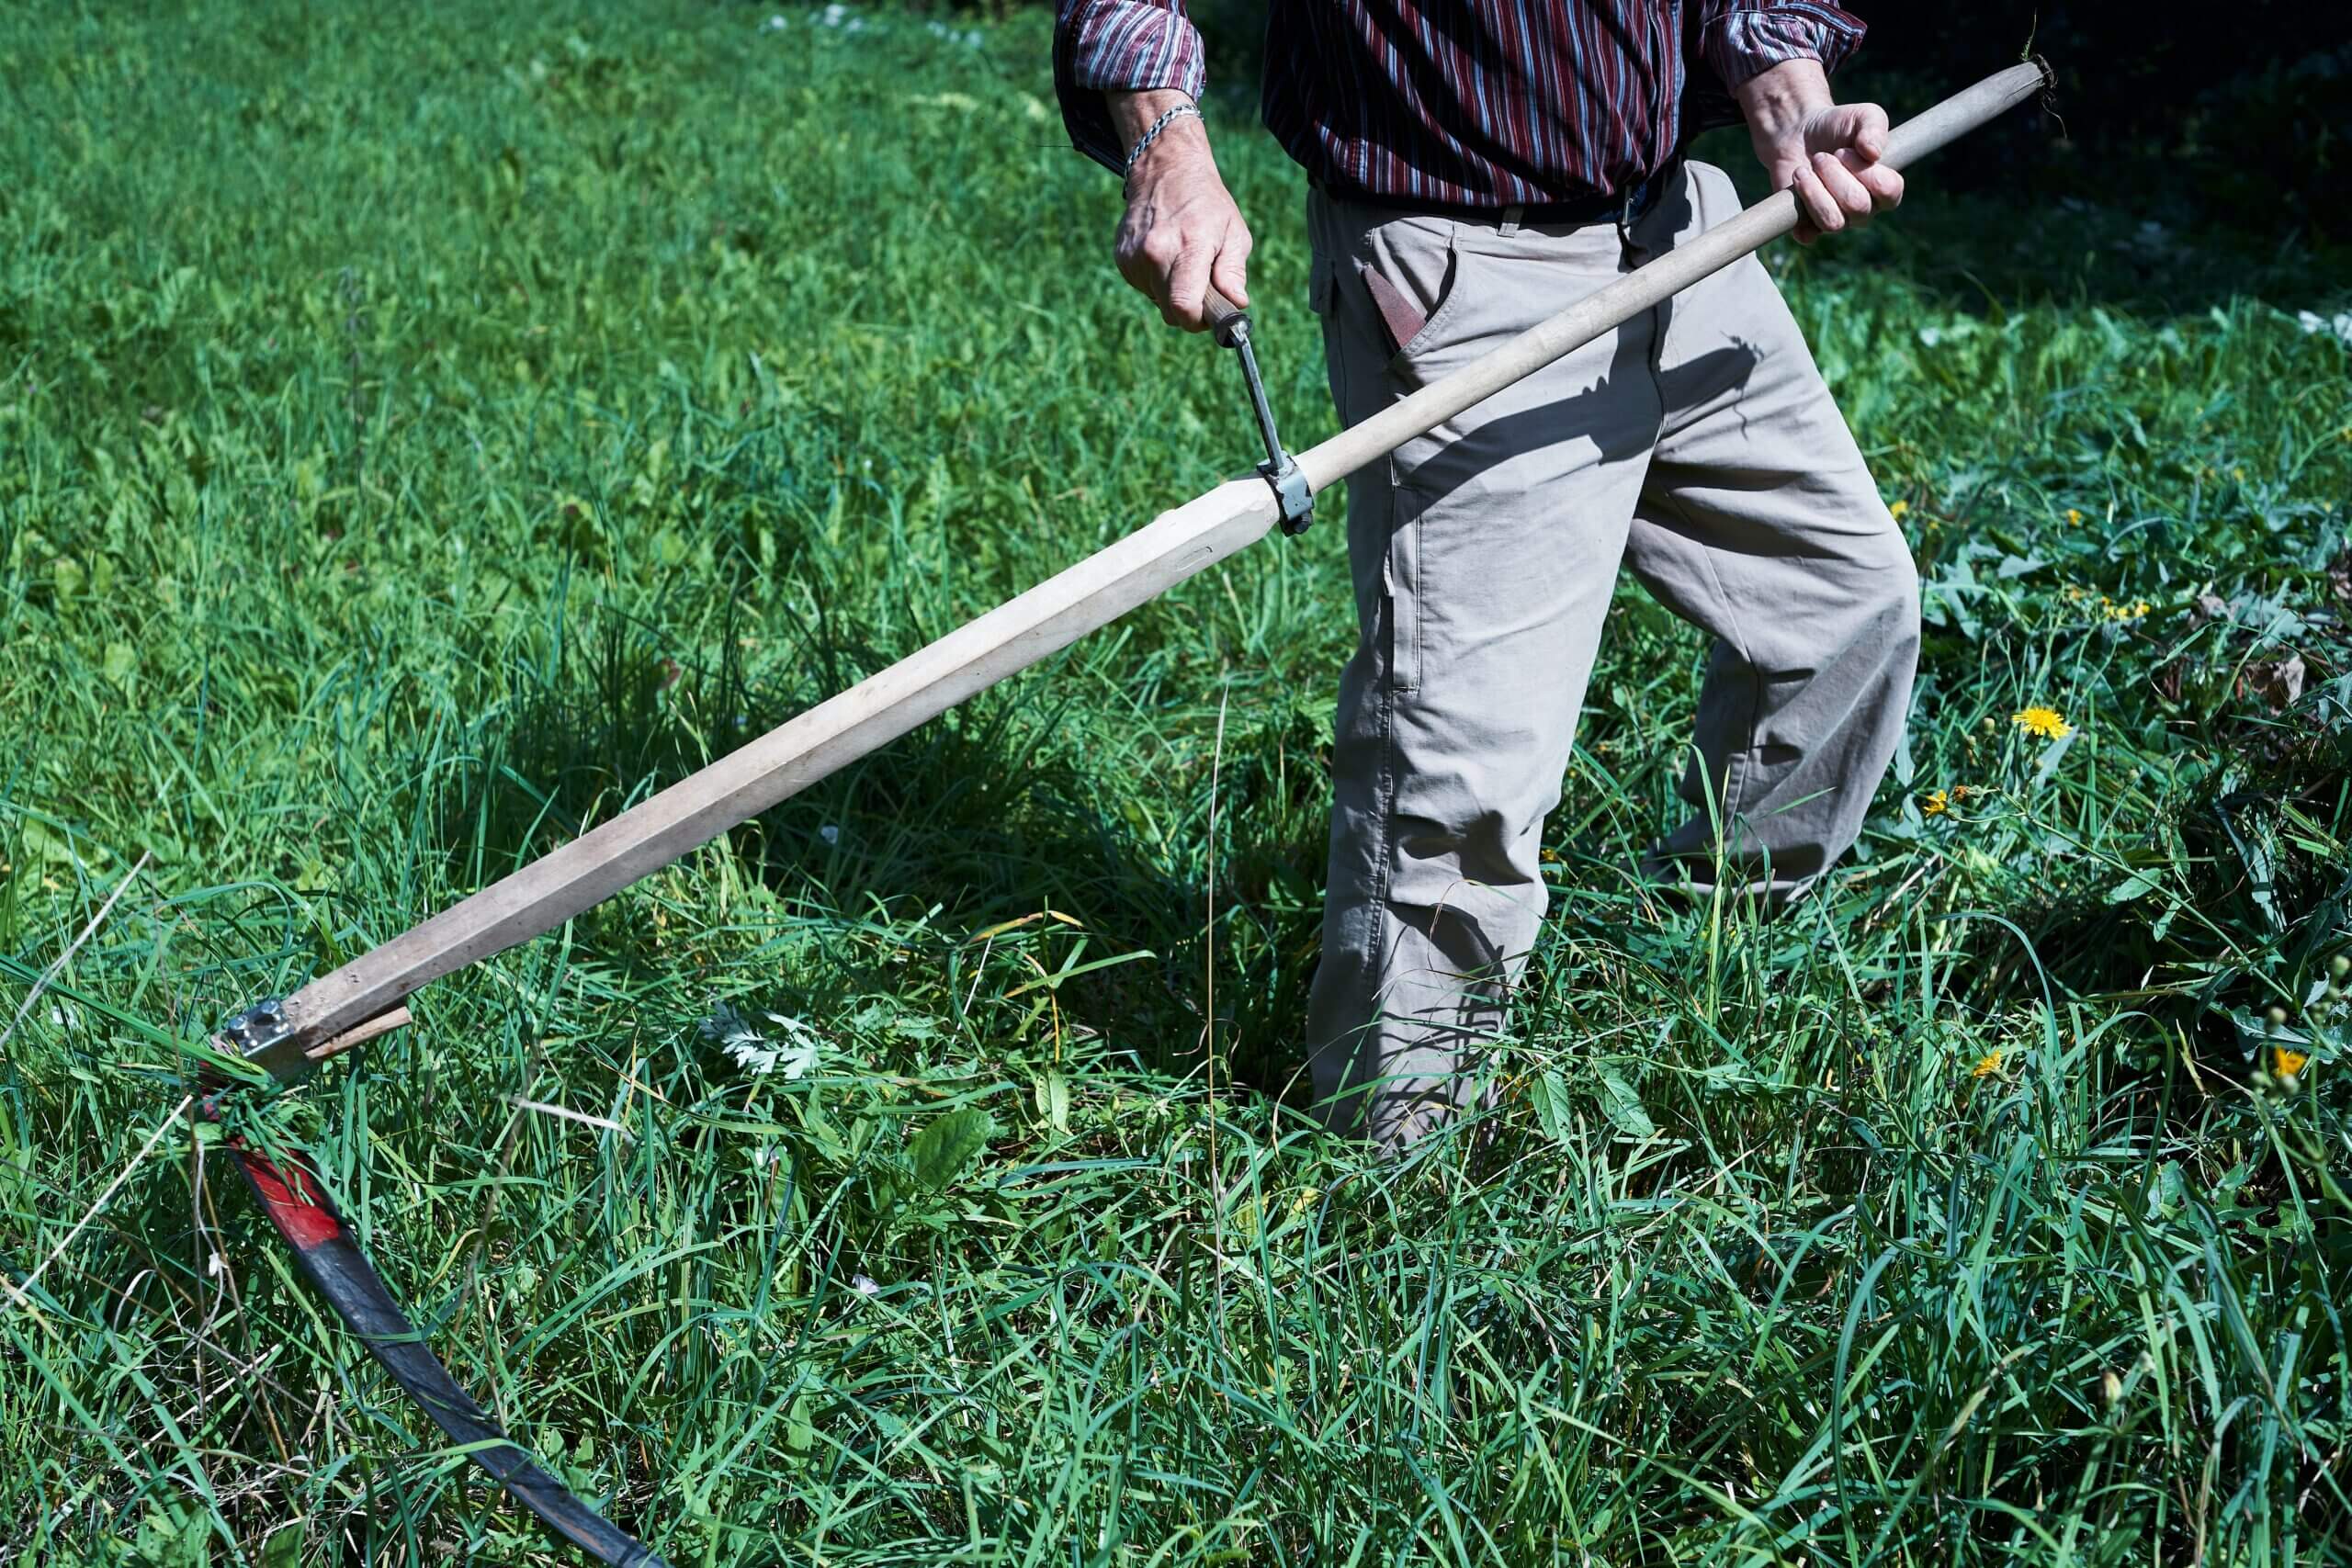 An image of grass being cut with a weedwhacker for yard waste disposal